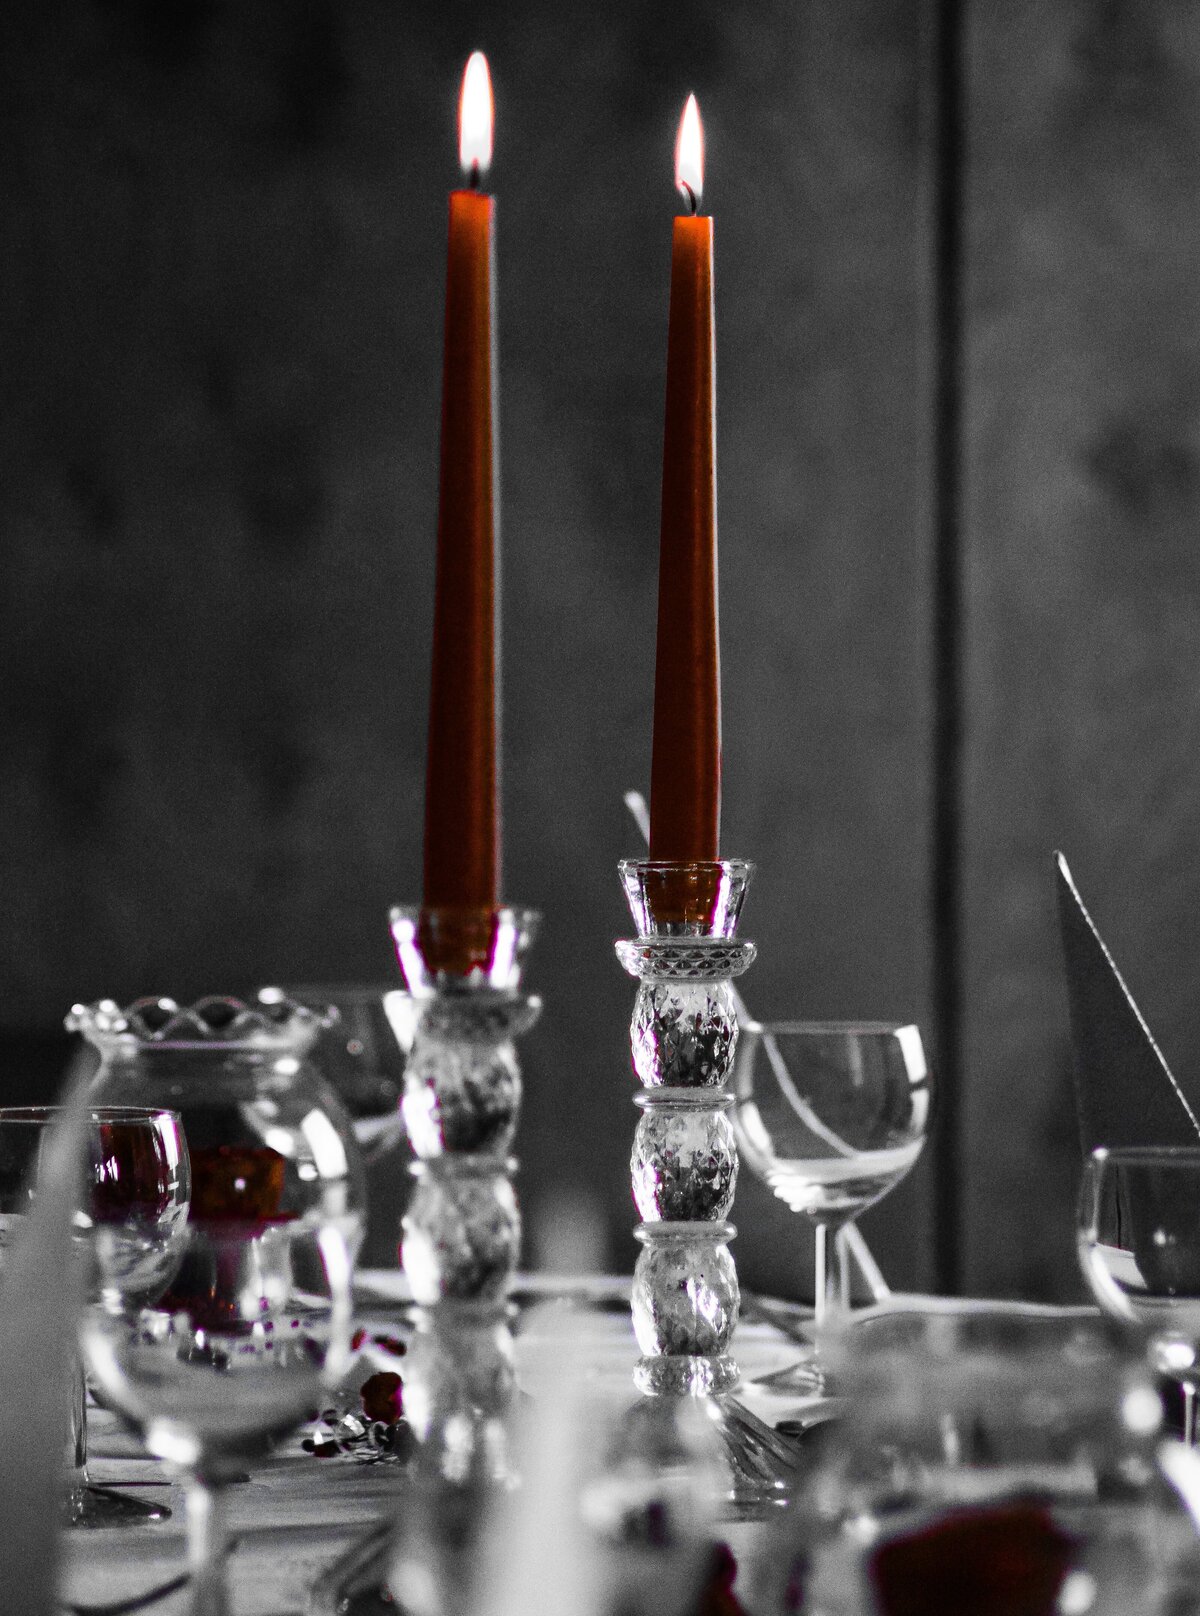 Two red candles in glass candlesticks are placed on a table set for a party.